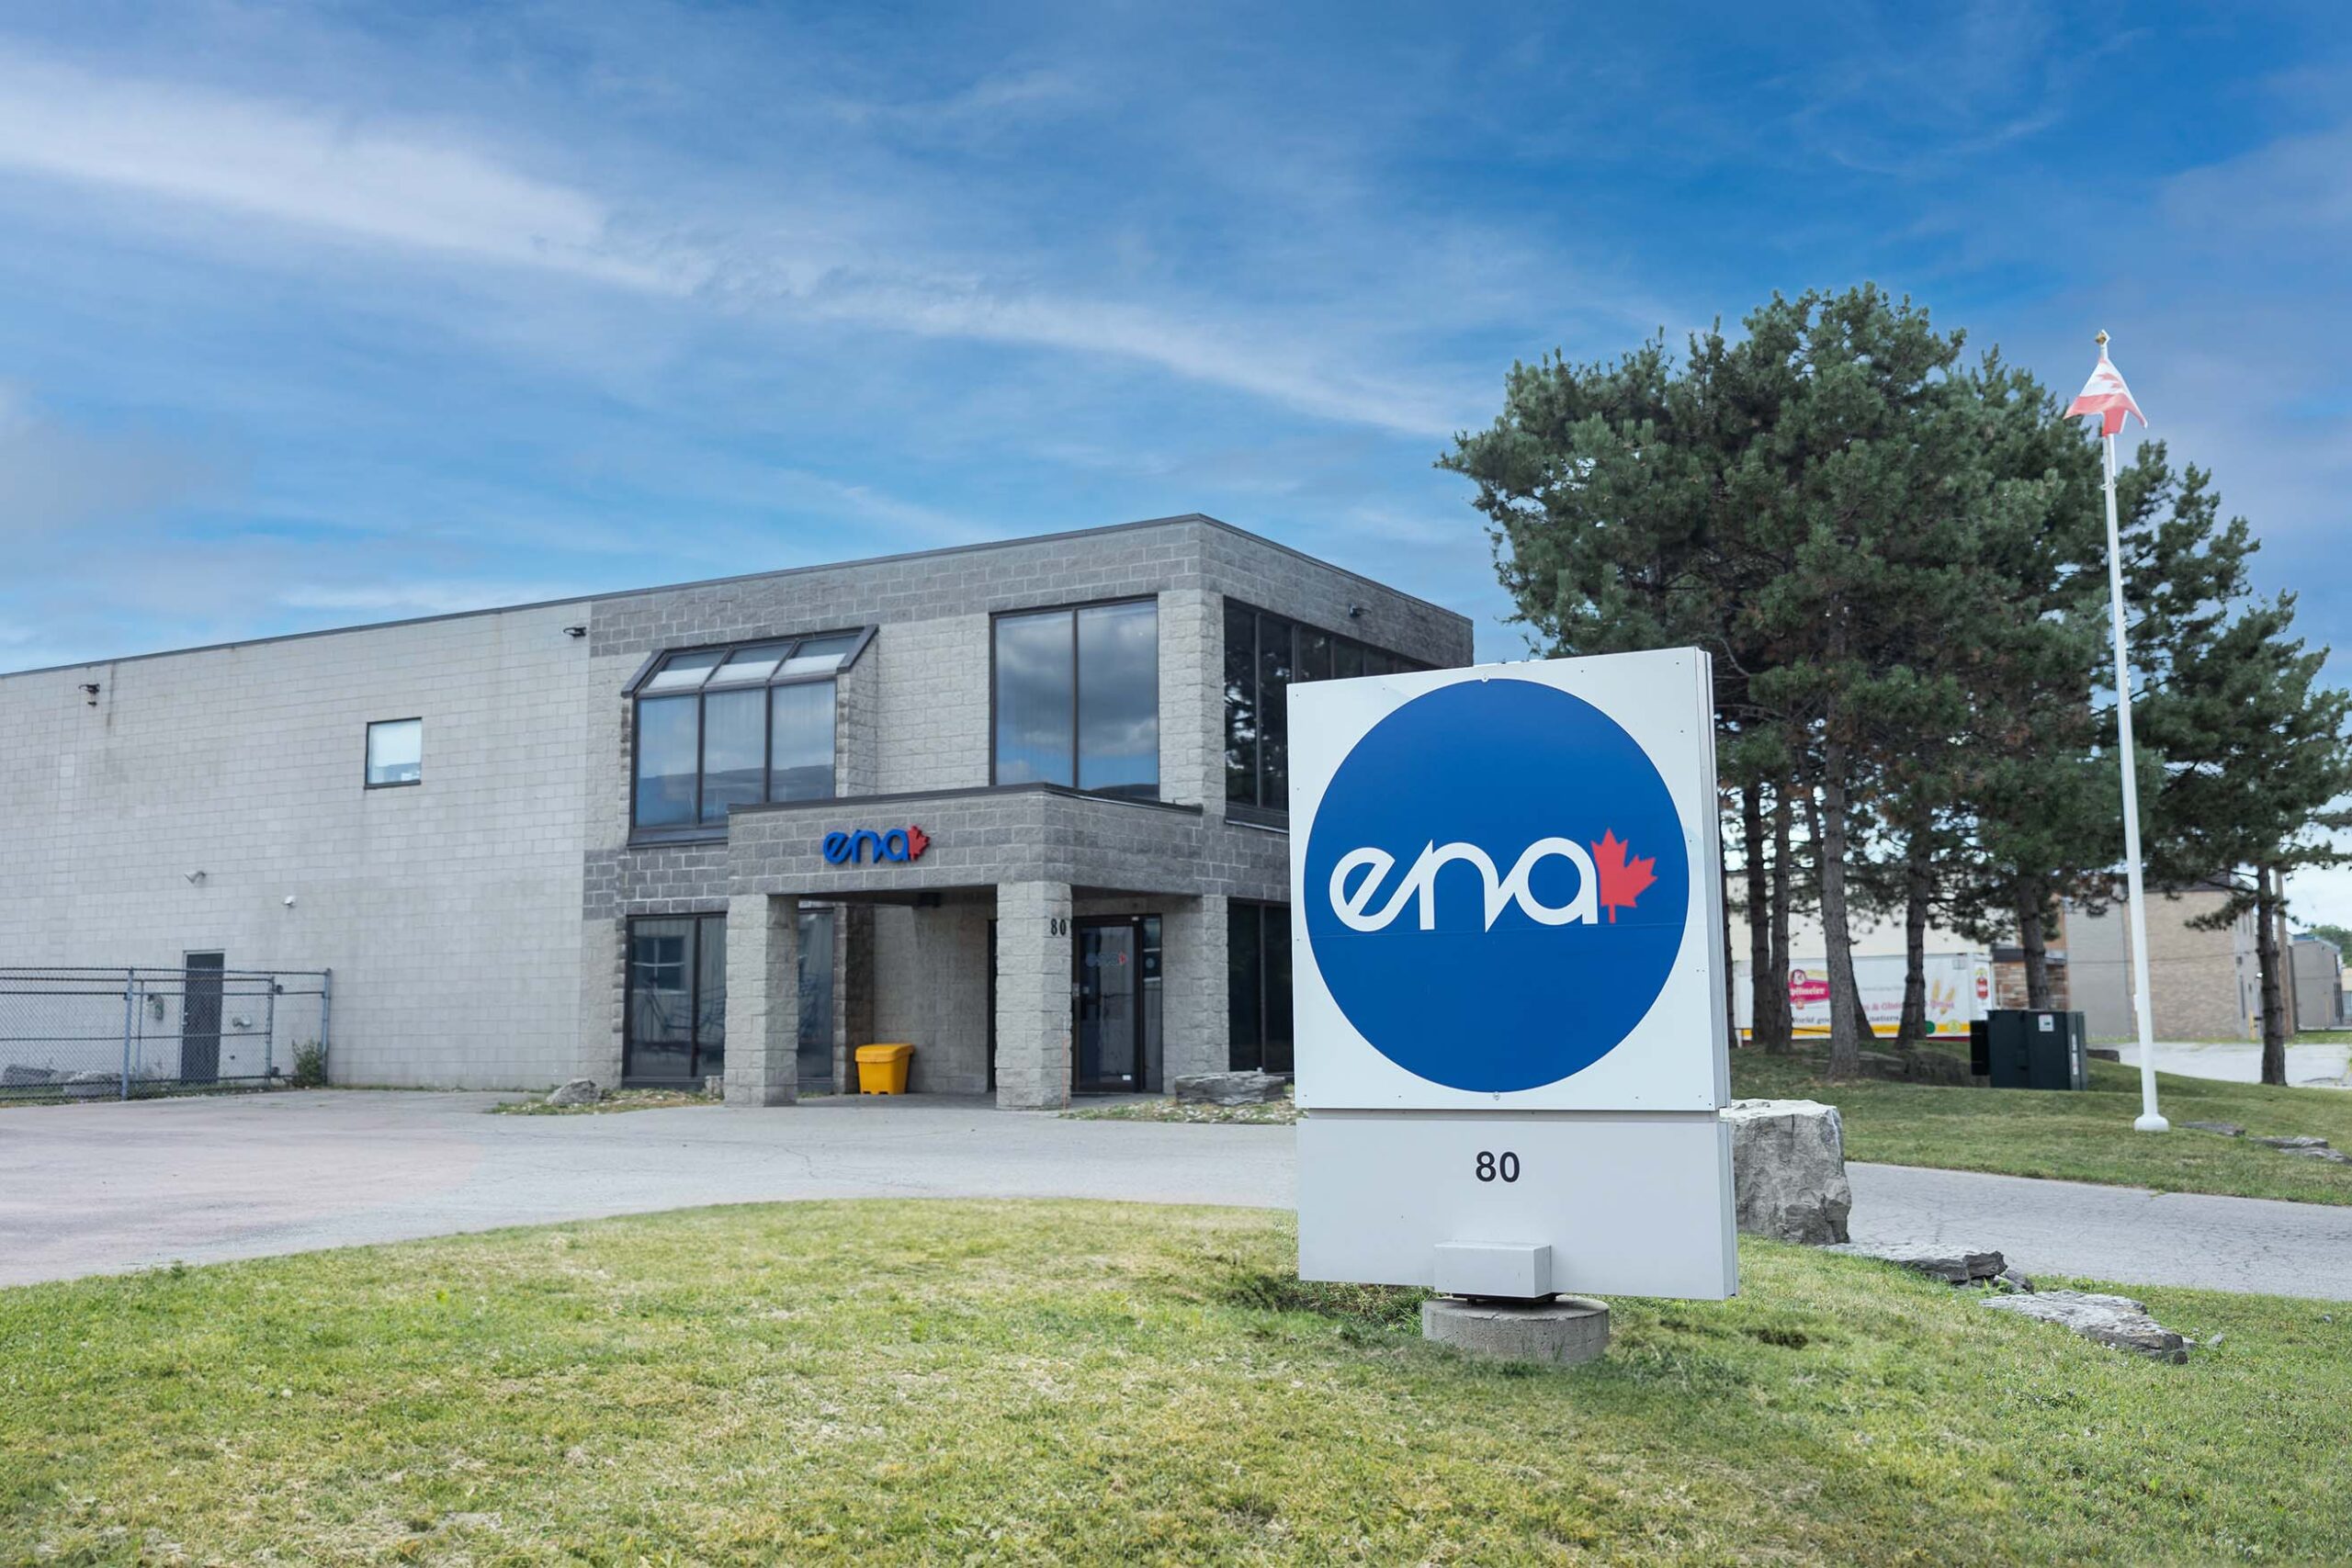 The full view of ENA with the larger sign on the front lawn